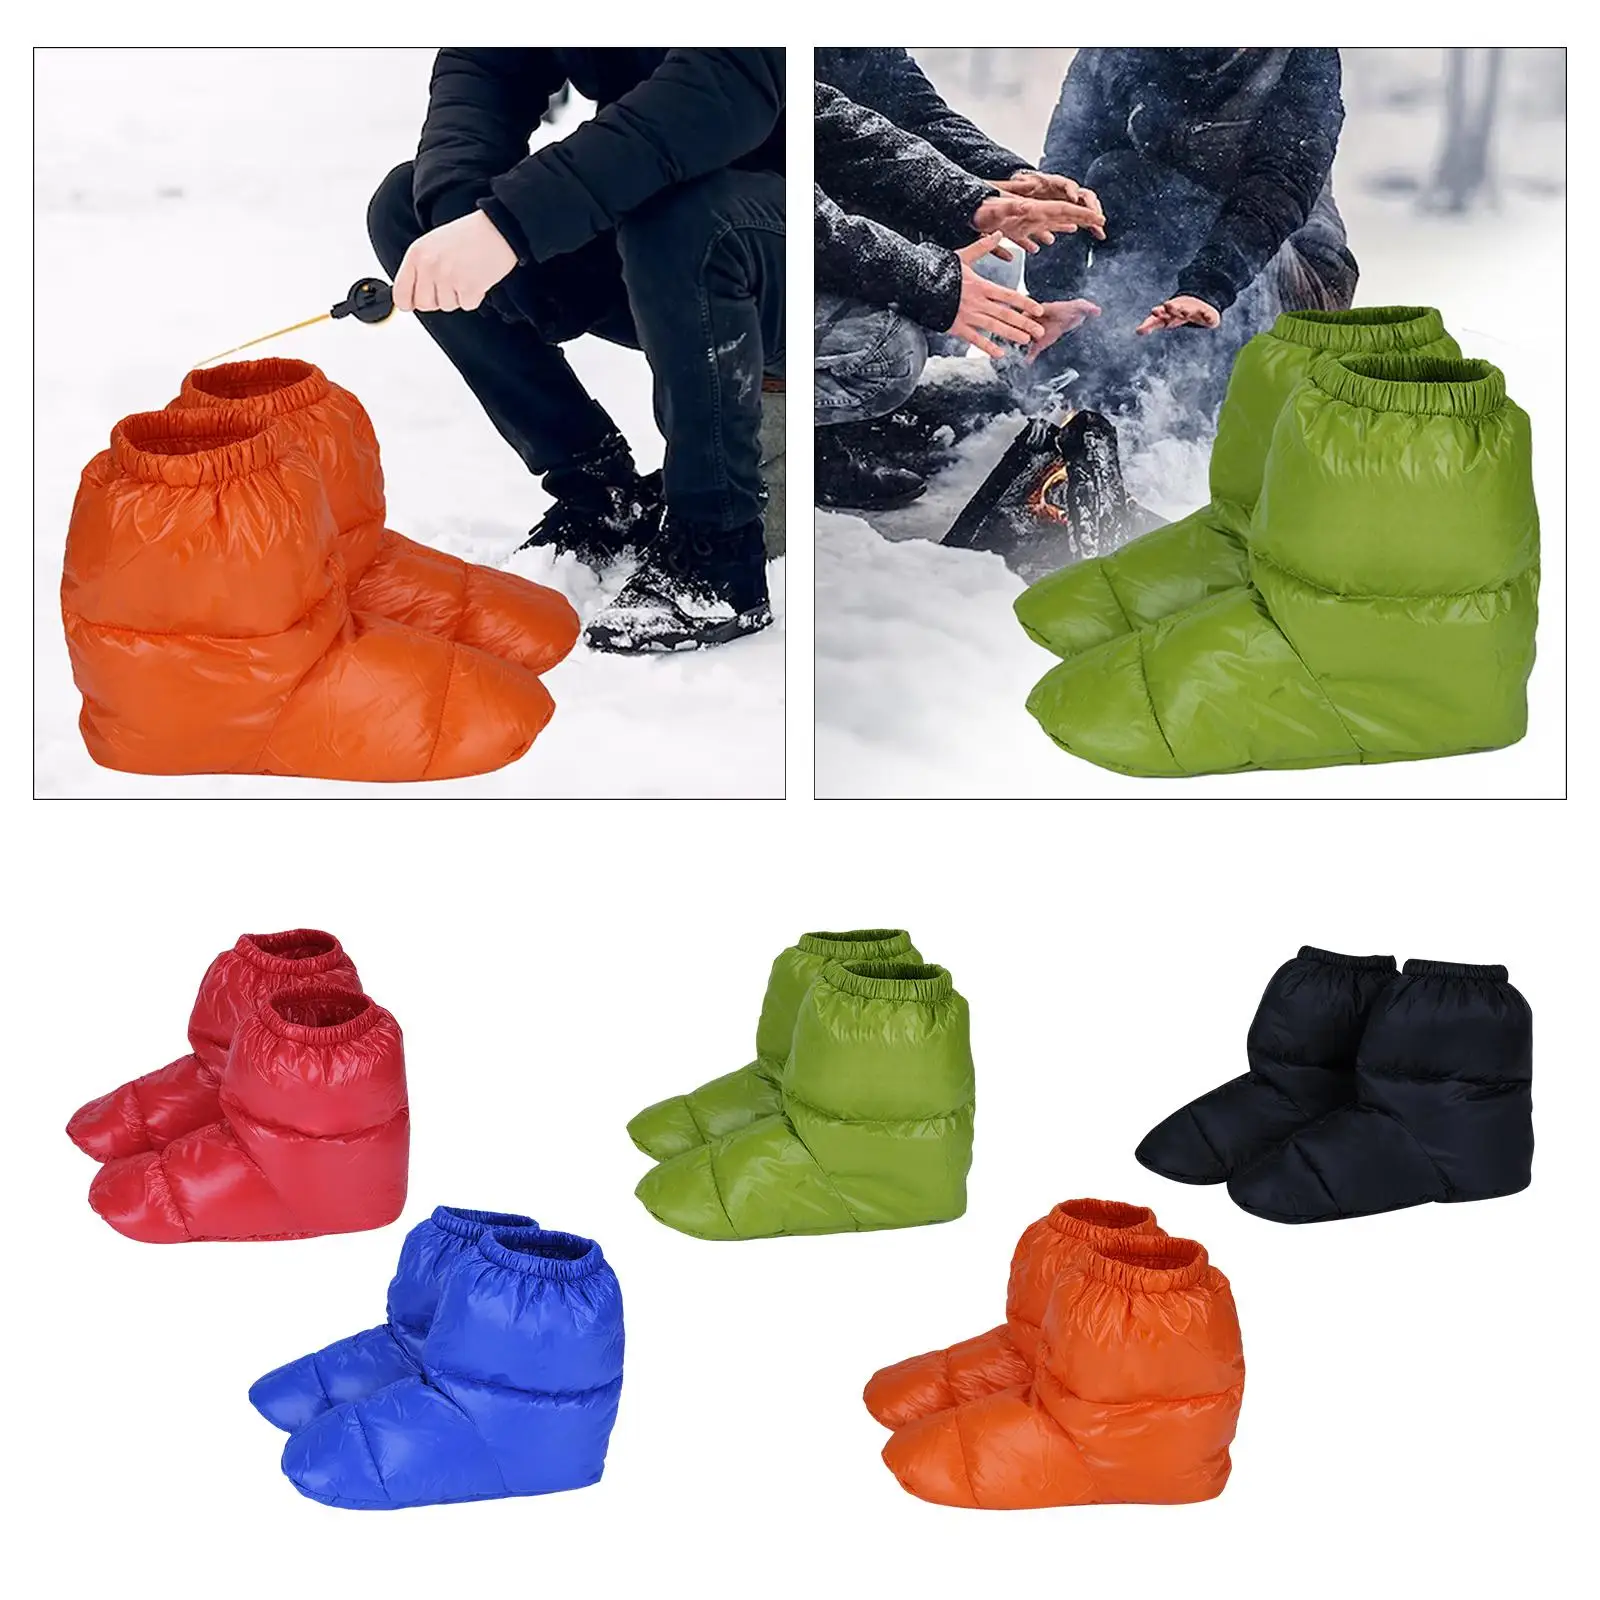 1 Pair Winter Down Slippers Bootie Shoes Waterproof Adults Footwear Feet Cover Socks for Office Hiking Camping Indoor Fishing